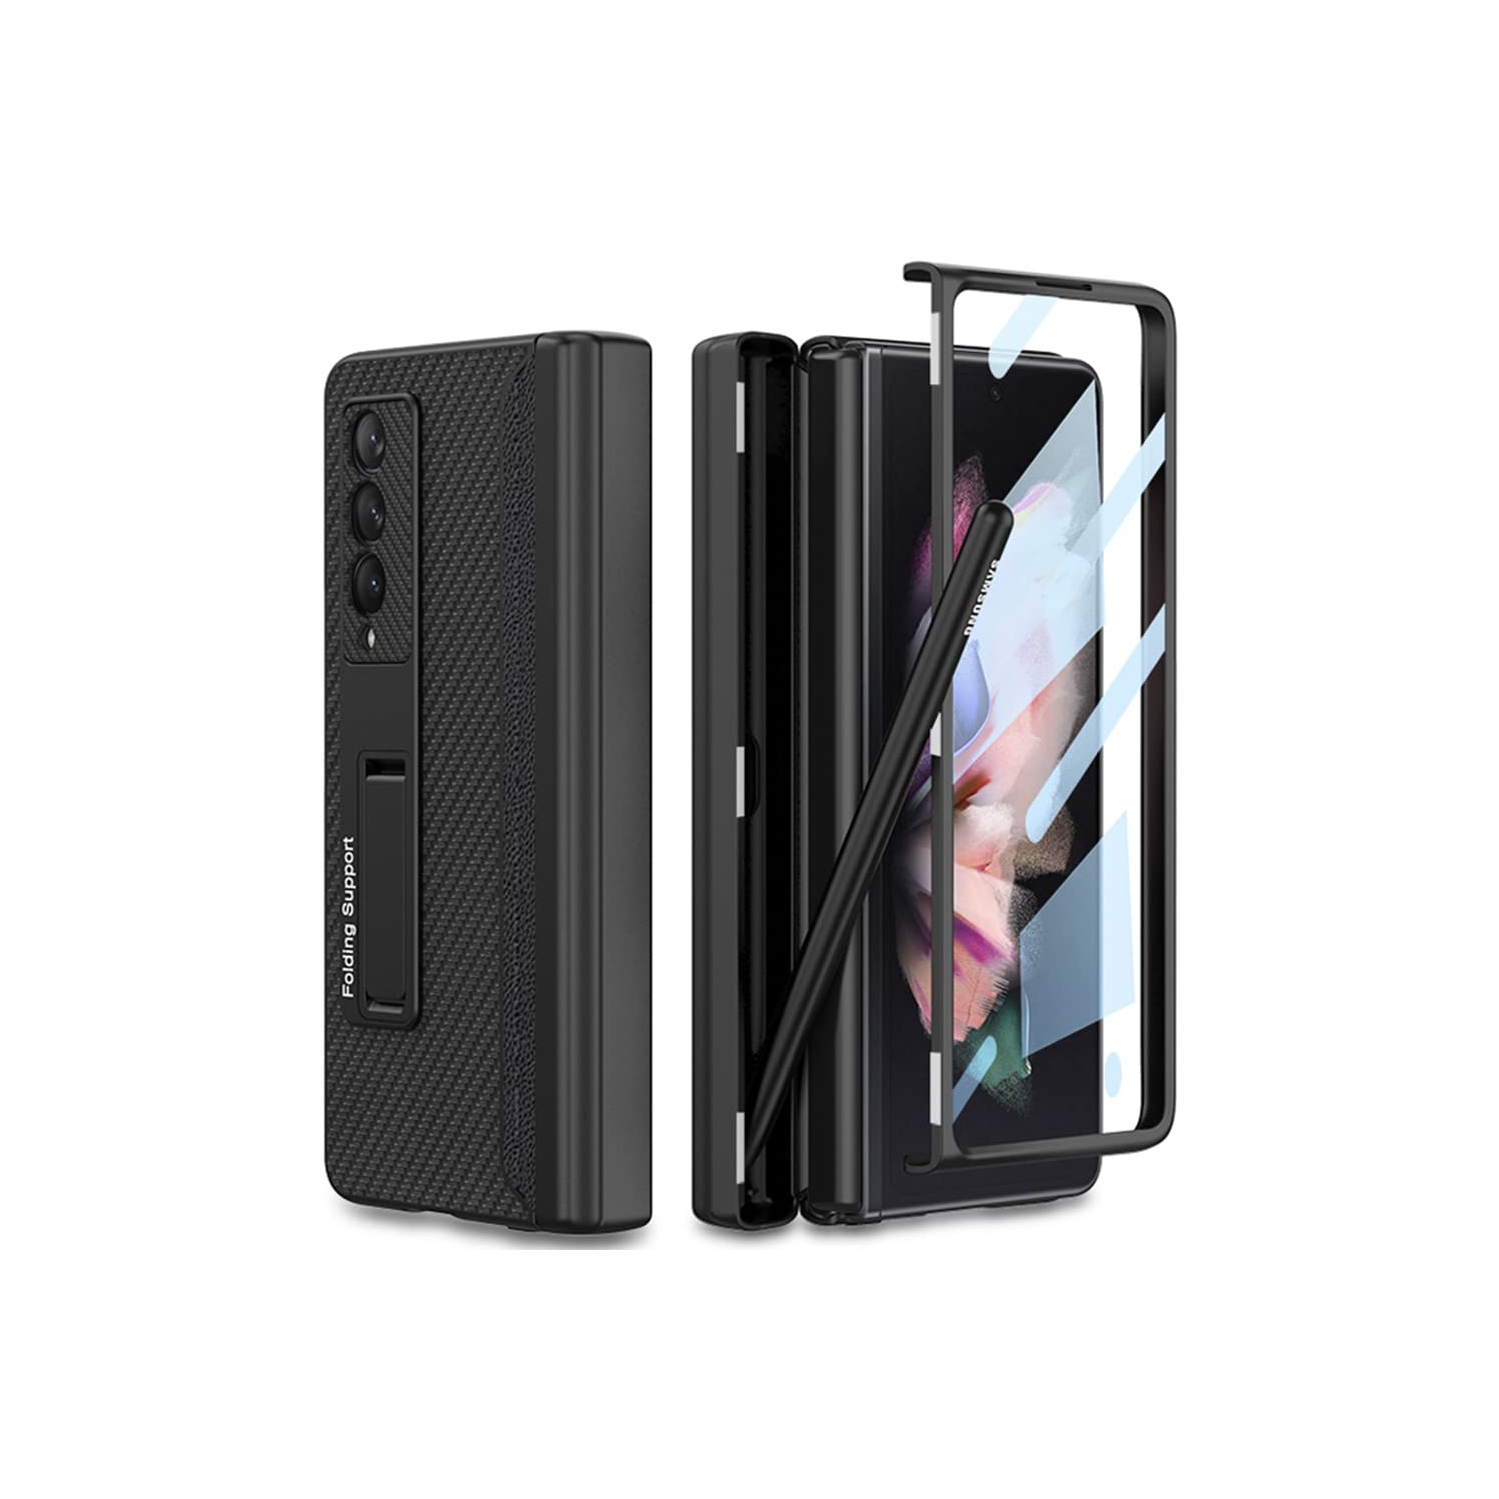 SHIEID Samsung Z Fold 3 Case with Pen Holder, Galaxy Z Fold 3 Case with Hinge Protection Built-in Screen Protector & Kicksta